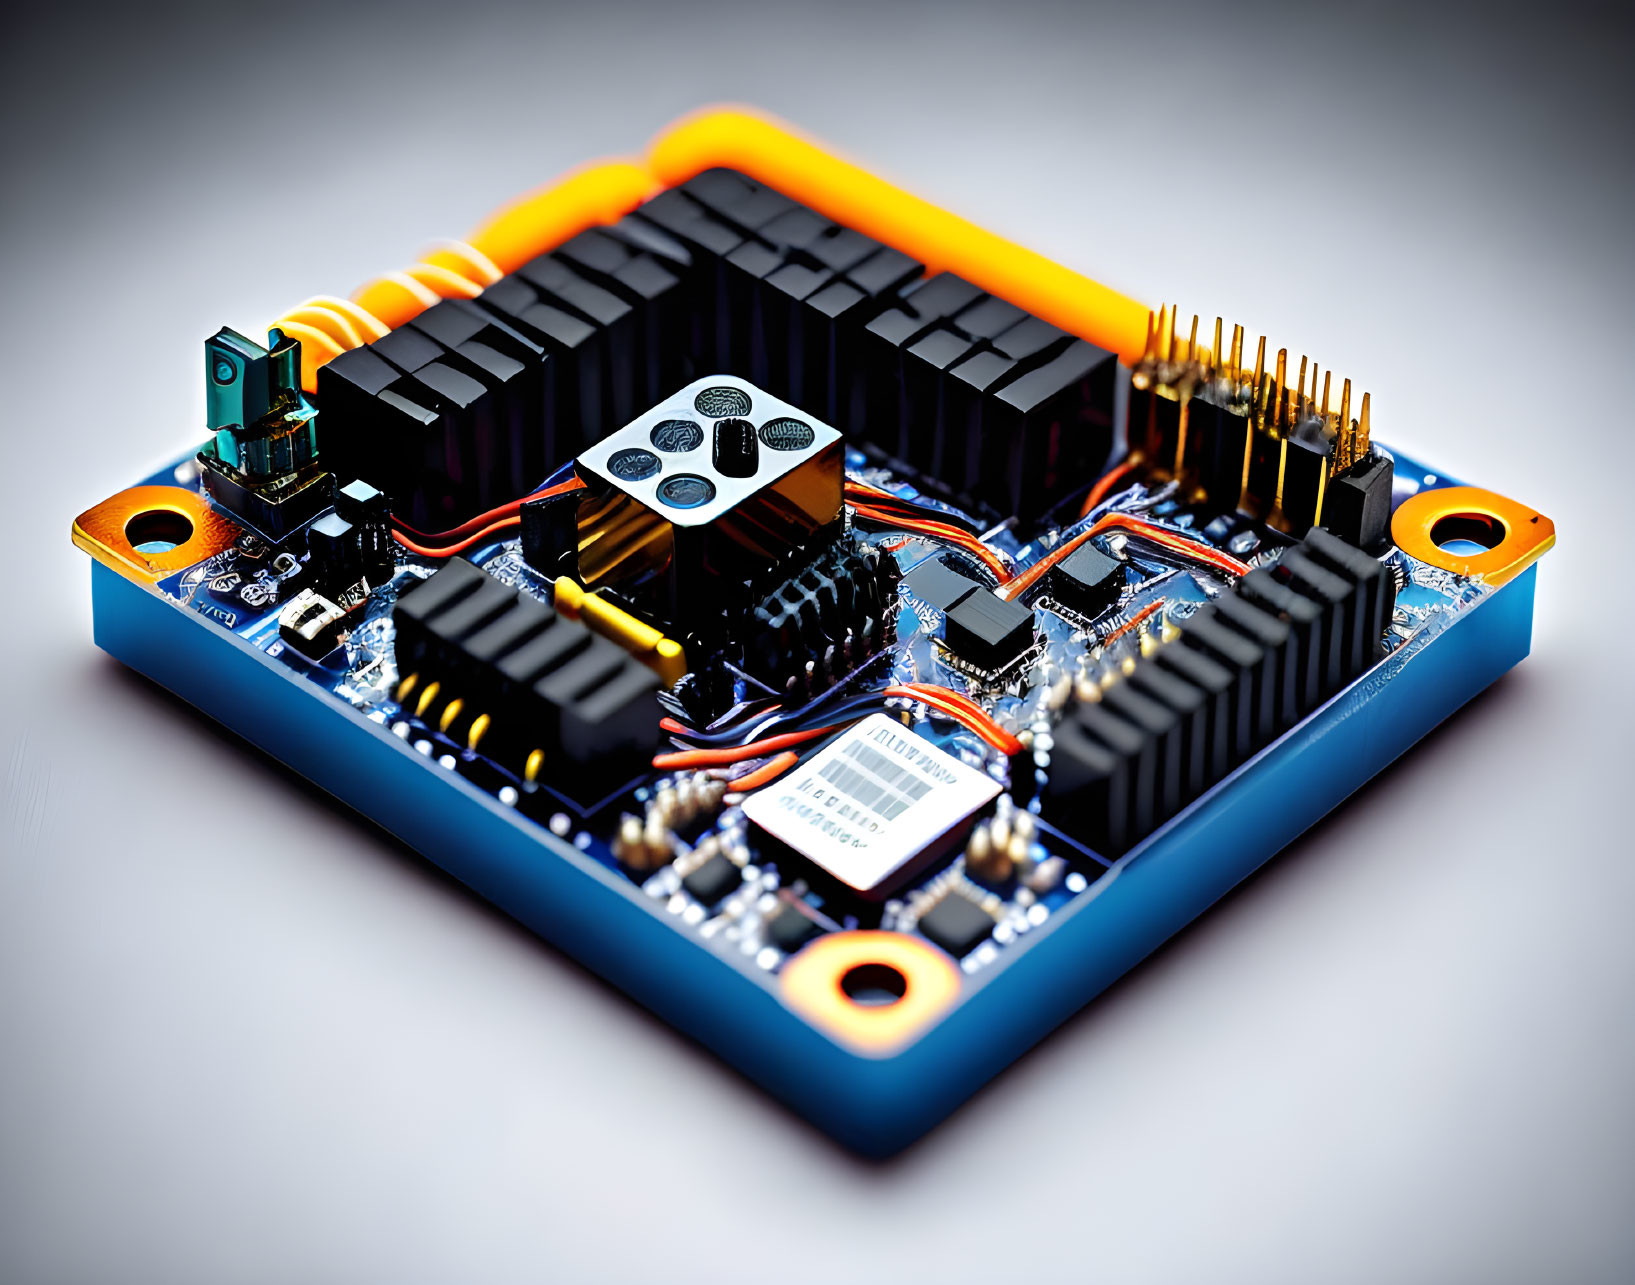 Electronic circuit board with CPU, heat sinks, and components on blurred background